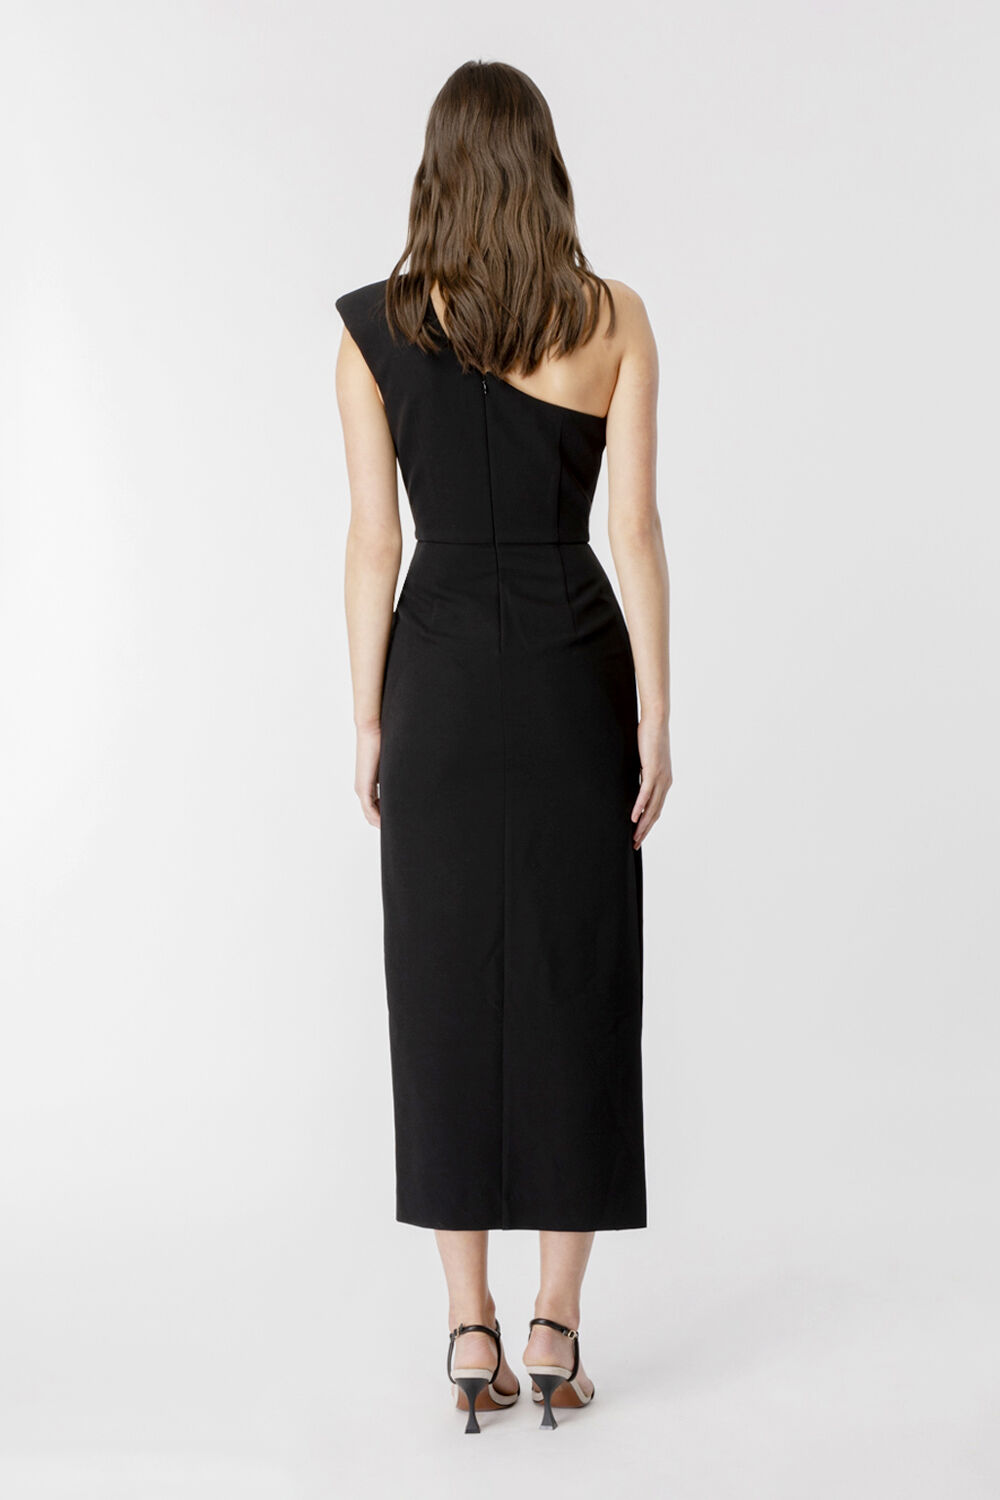 AVELINE ONE SHOULDER DRESS in colour CAVIAR